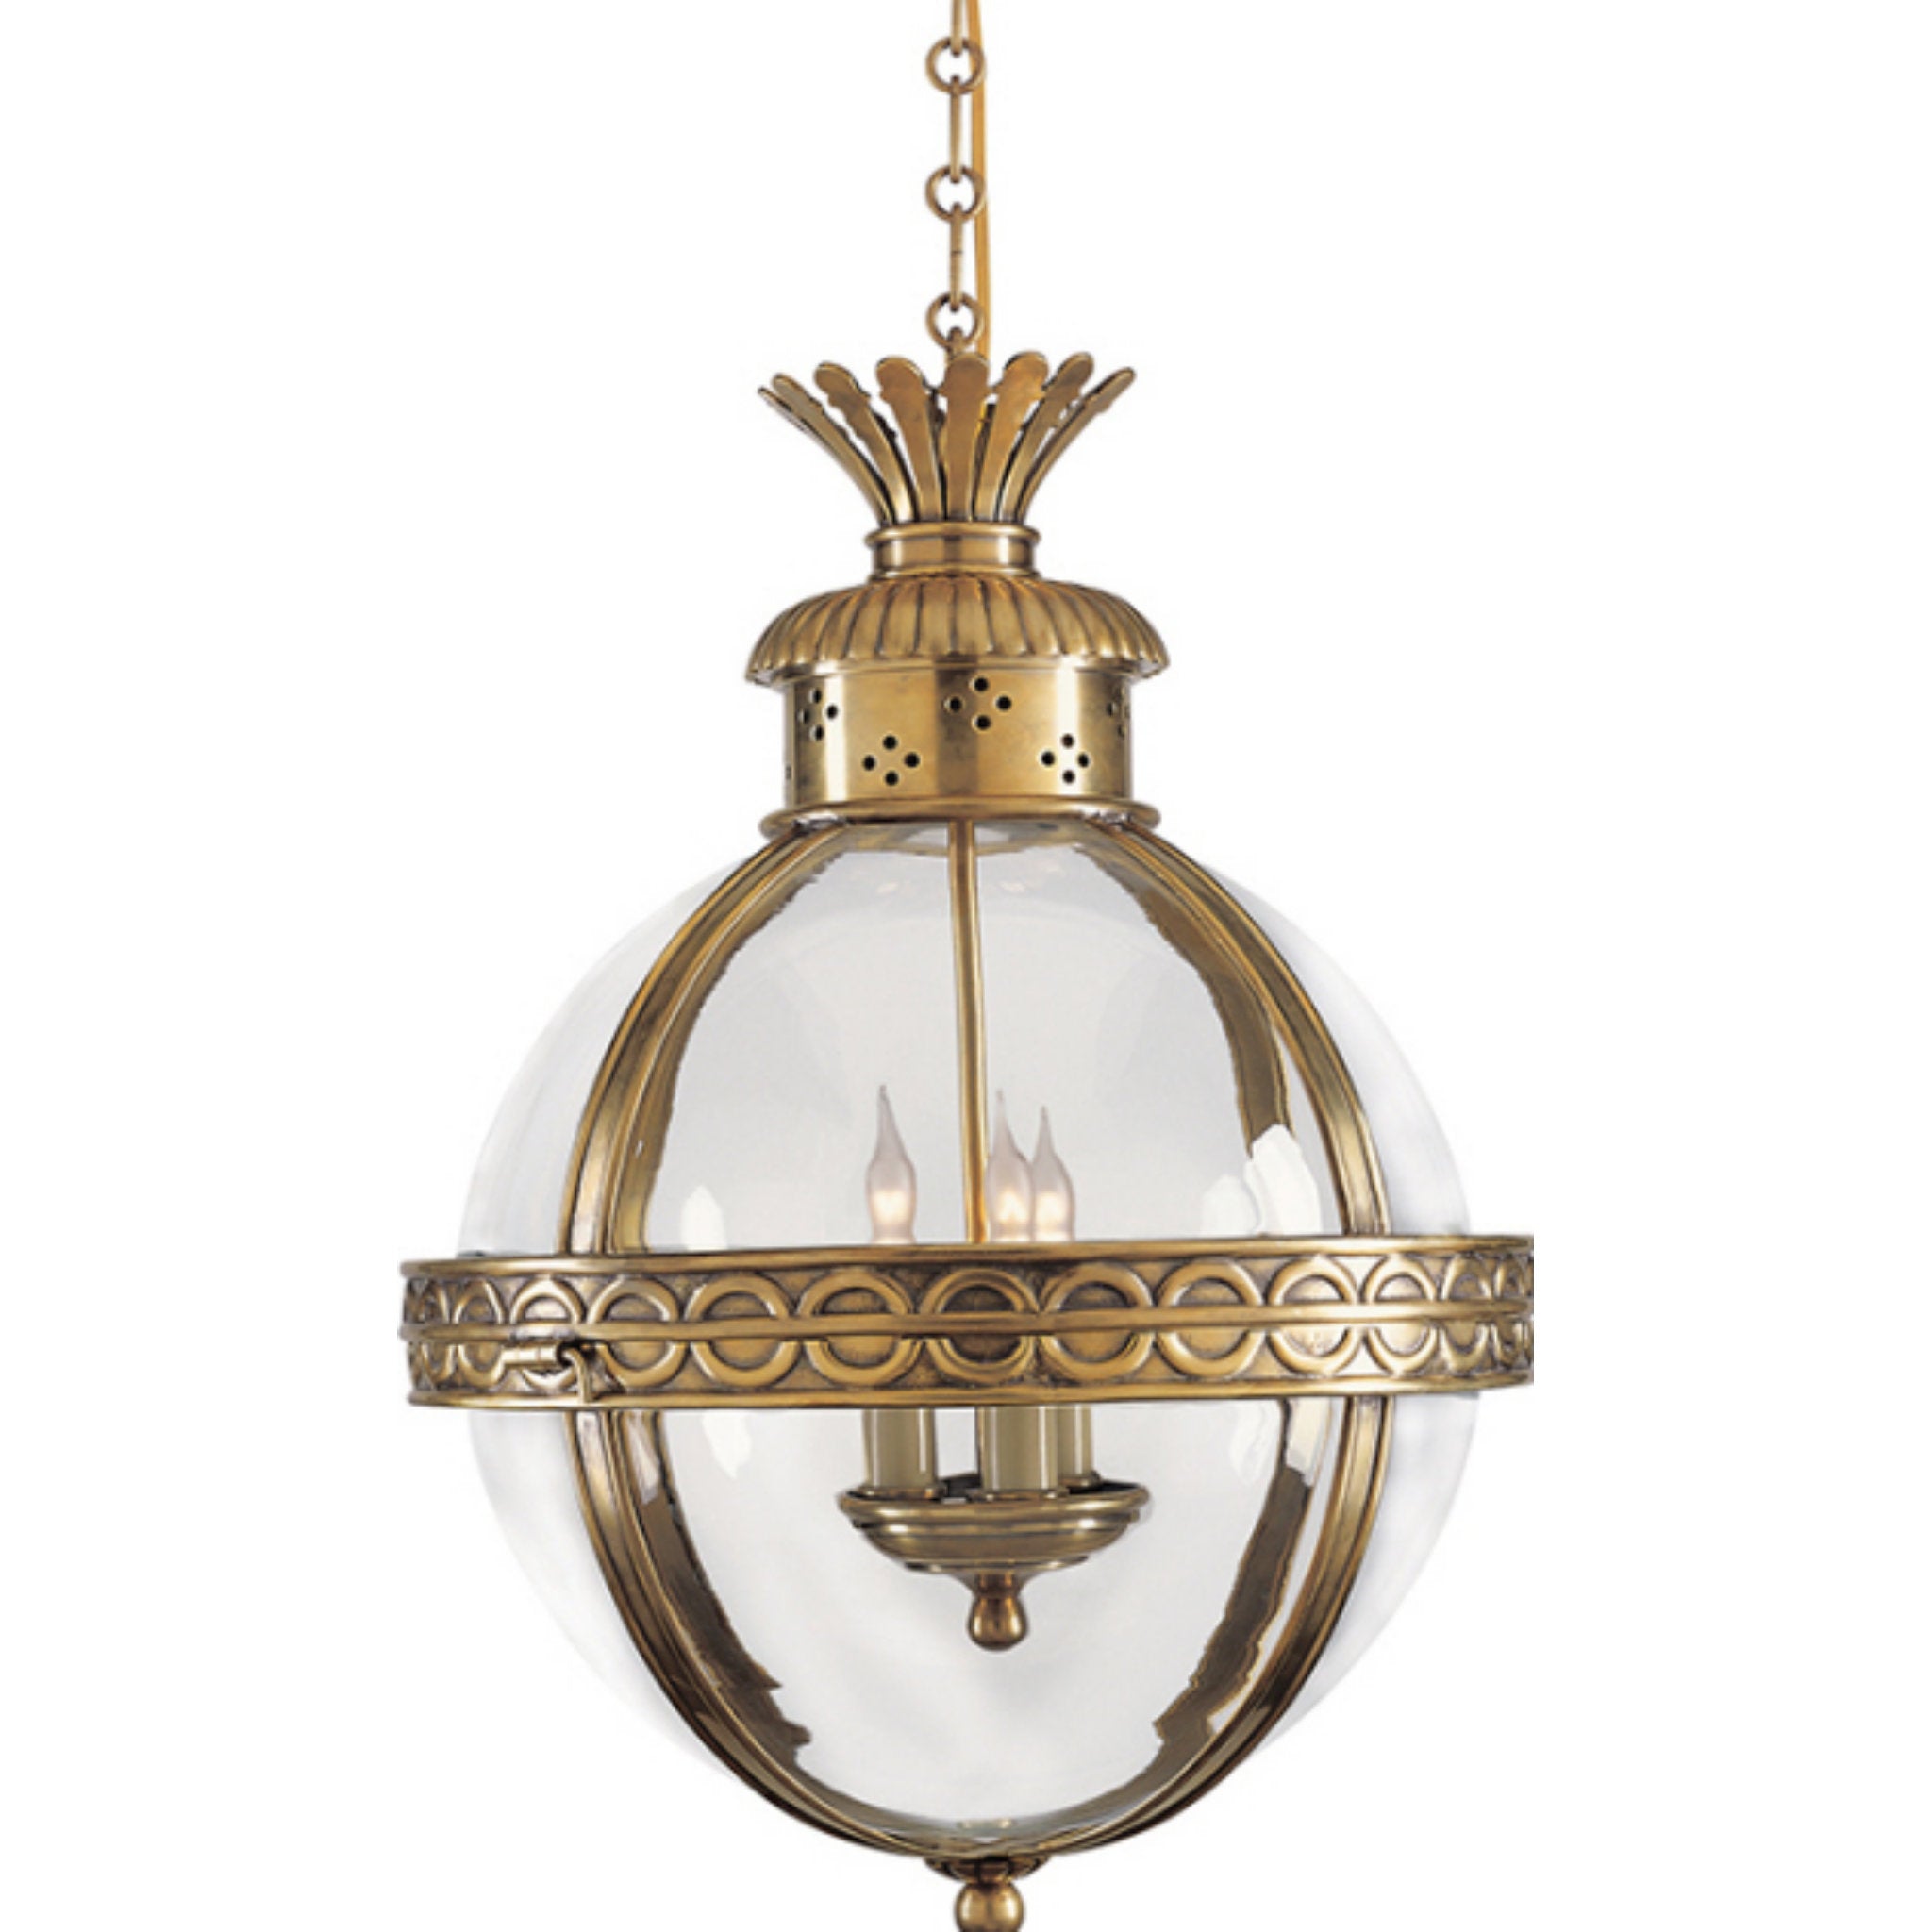 Chapman & Myers Crown Top Banded Globe Lantern in Antique-Burnished Brass with Clear Glass